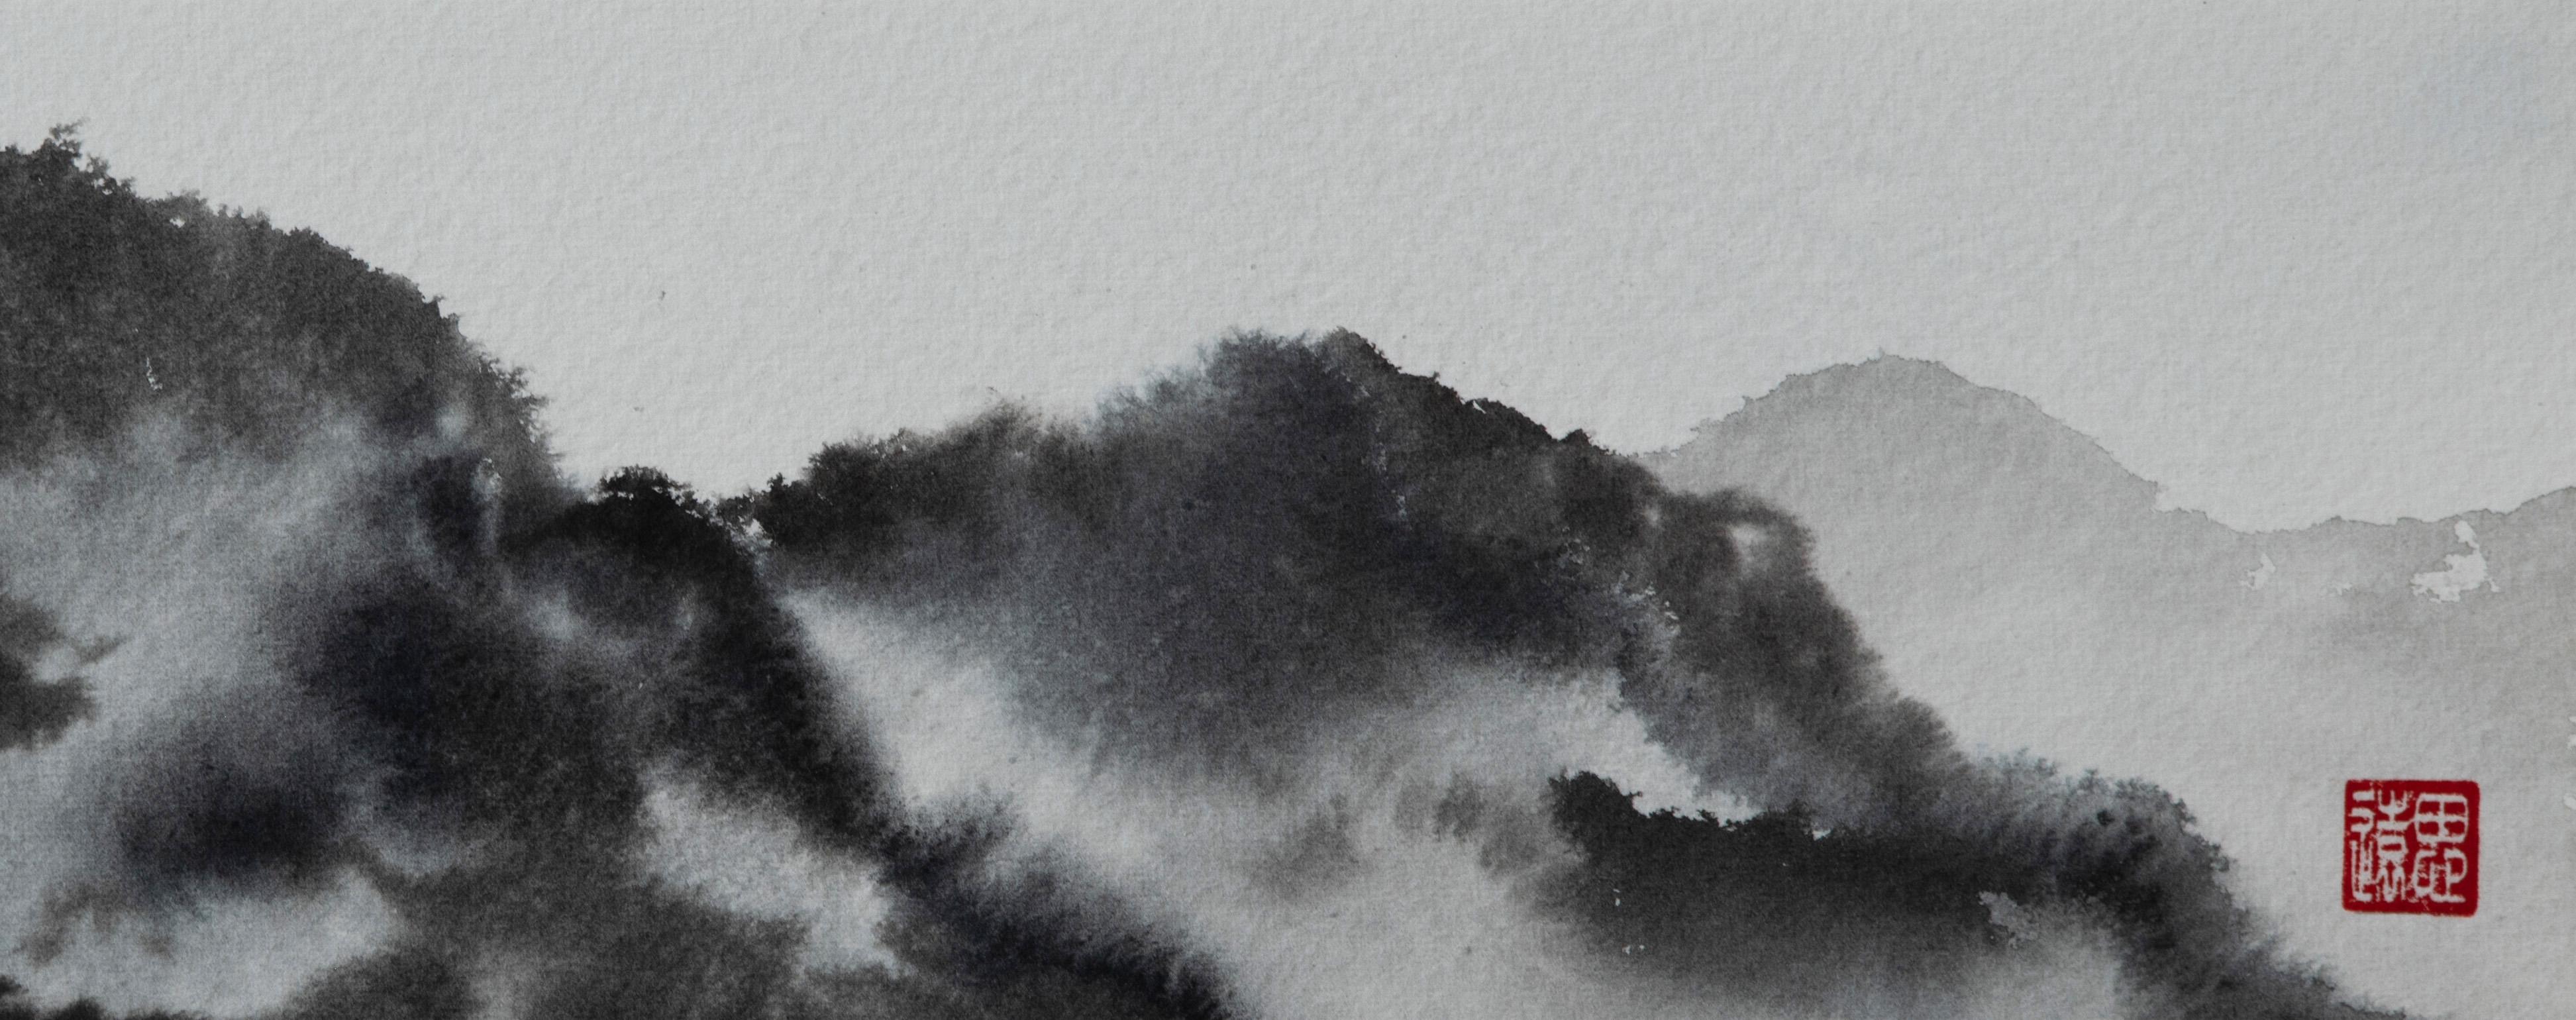 <p>Artist Comments<br>Artist Siyuan Ma exhibits an abstract landscape of dark misty mountains. The imagery takes the viewer into a dreamlike world of meandering black and gray gradations. Continuous mountain ranges linger in the sky with profound